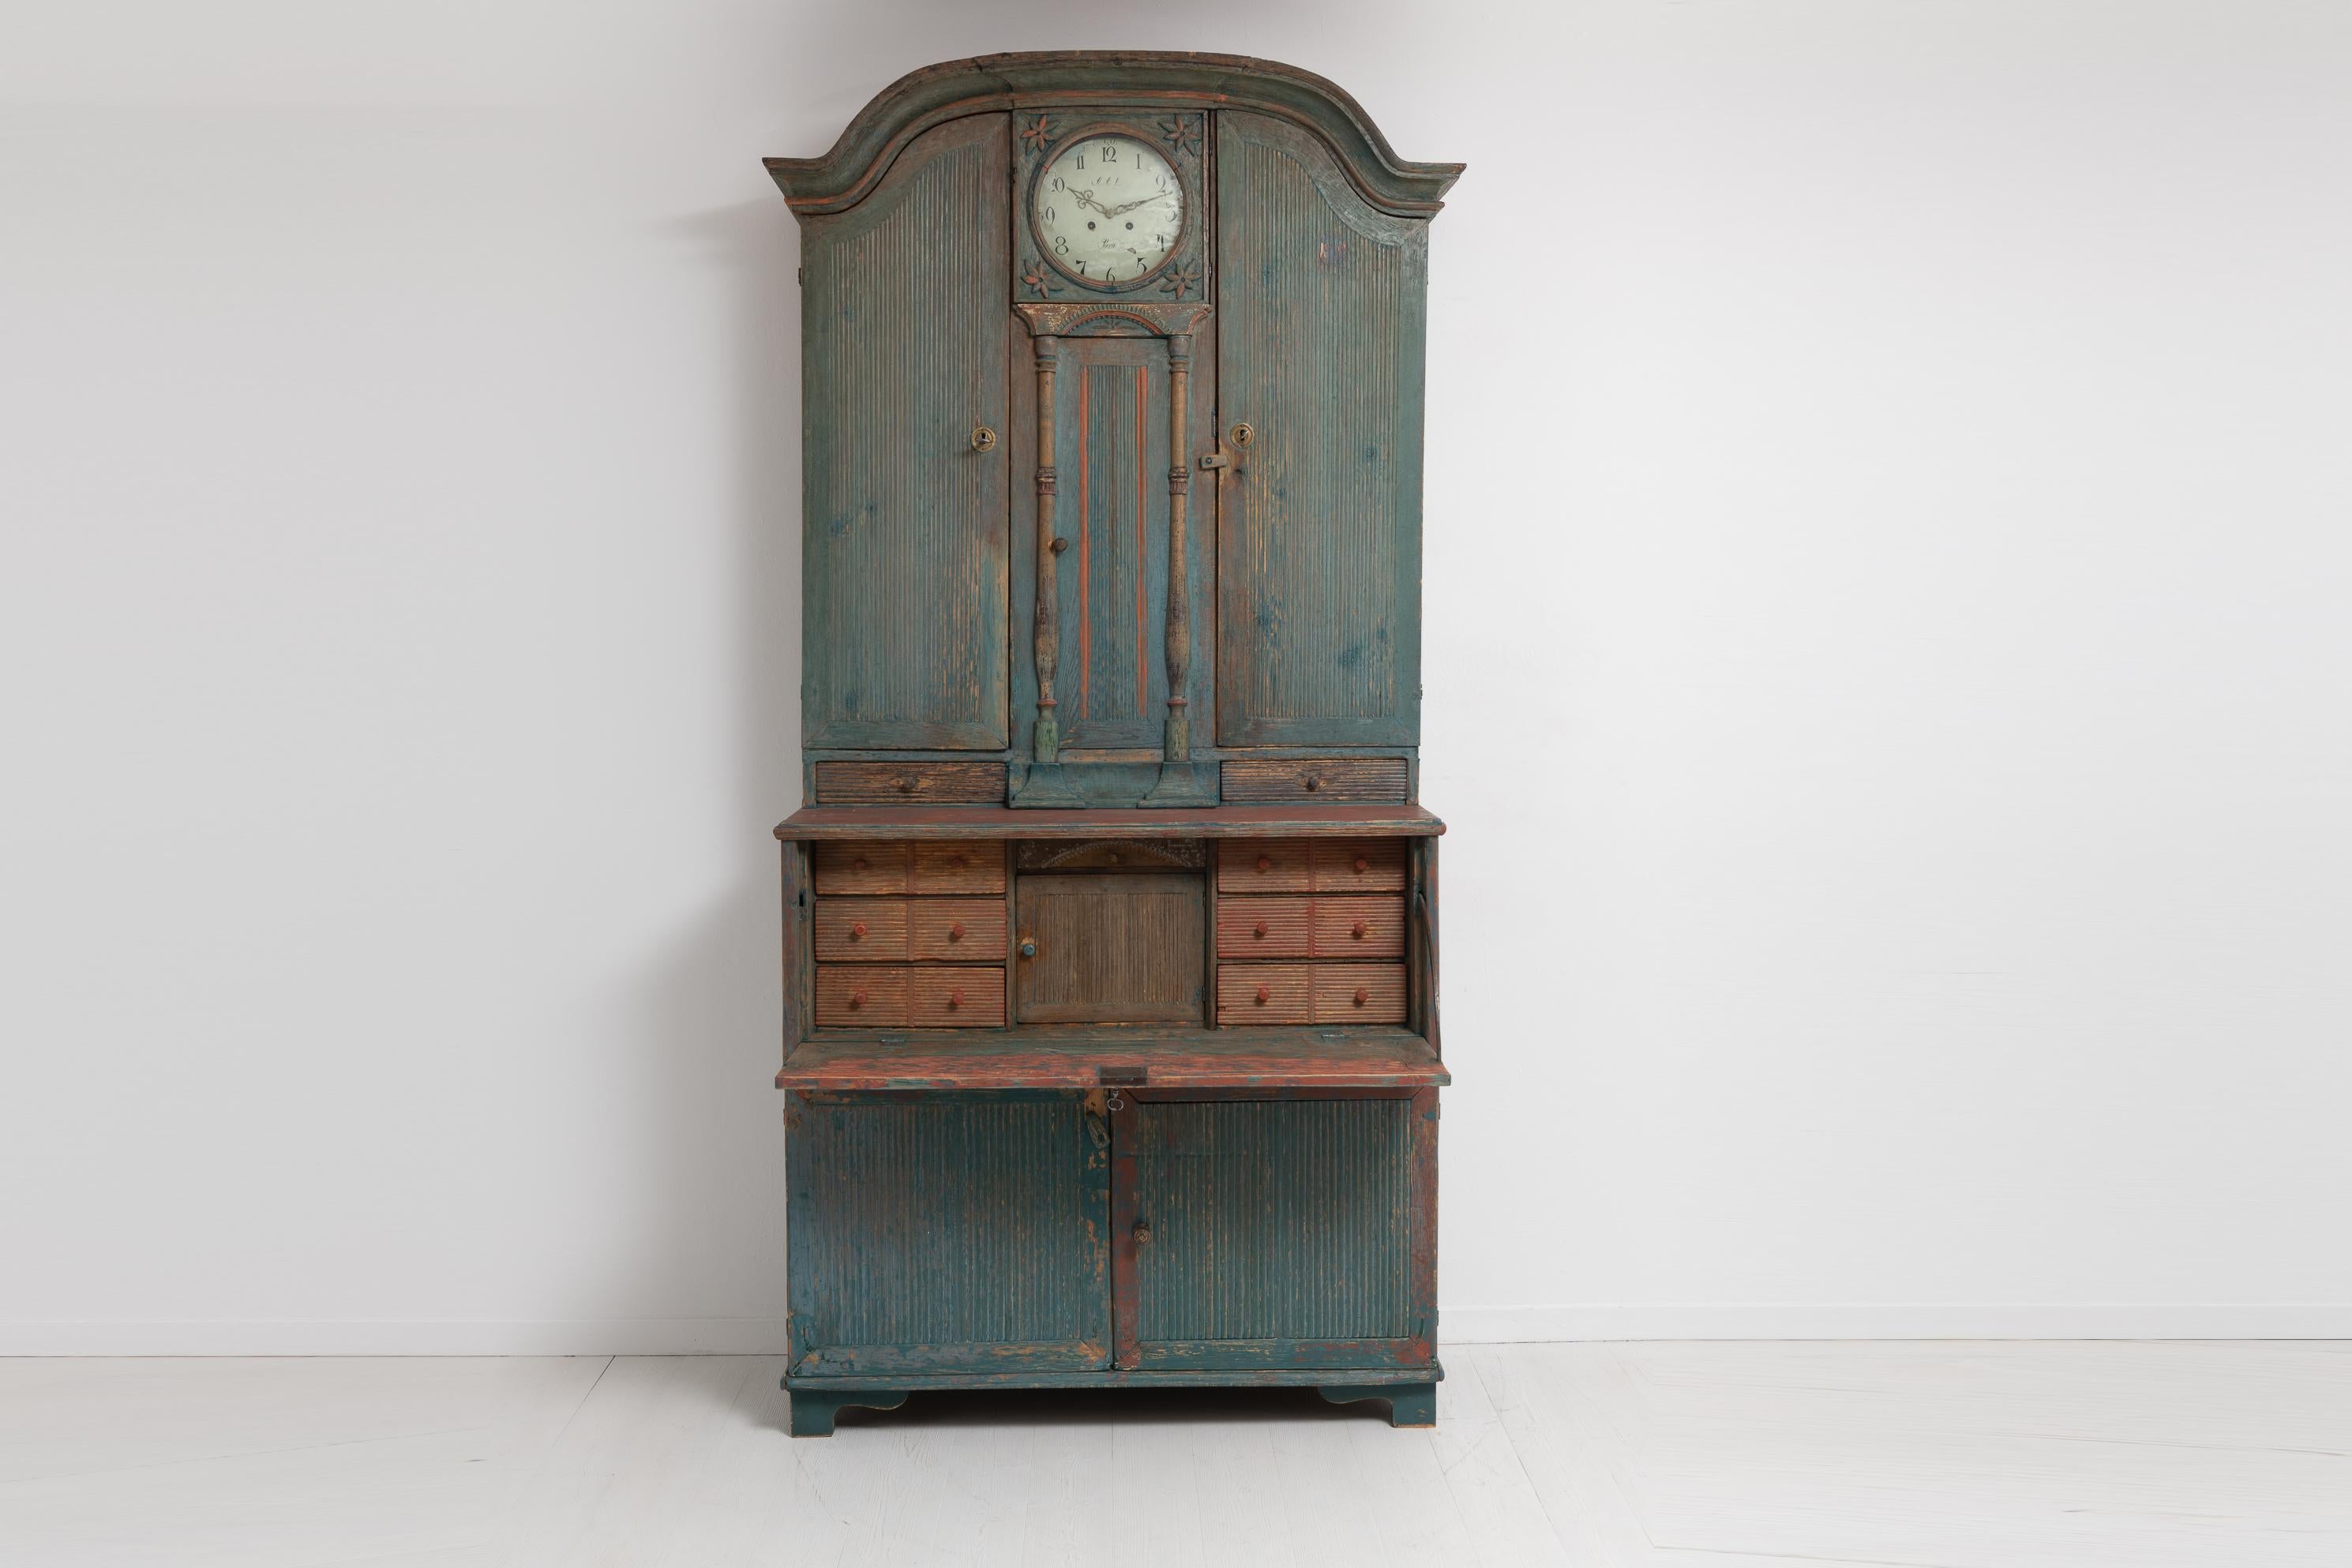 Clock bureau cabinet from the transitional period between rococo and gustavian, around 1810. The clock cabinet is from Northern Sweden and dry scraped by hand to old historic paint. The cabinet combines multiple furnitures by having both the writing